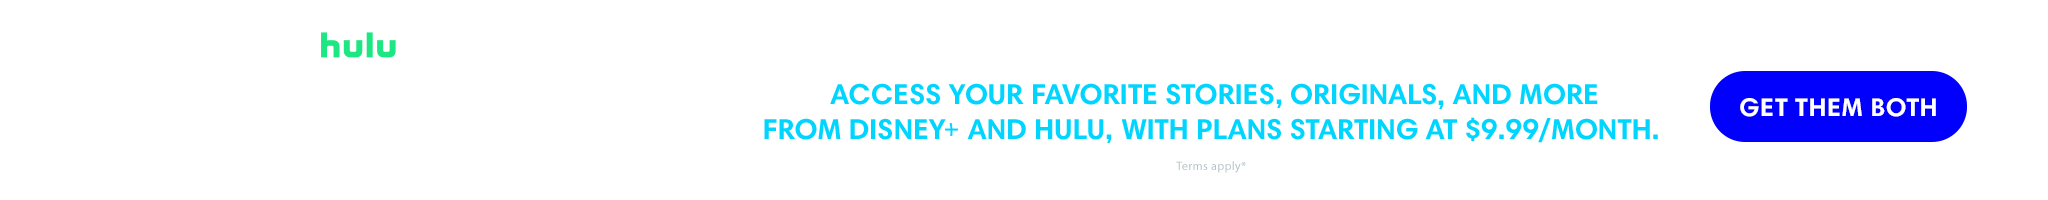 Access your favorite stories, Originals, and more from Disney+ and Hulu, with plans starting at $9.99/month. | Get them both. | Terms apply*